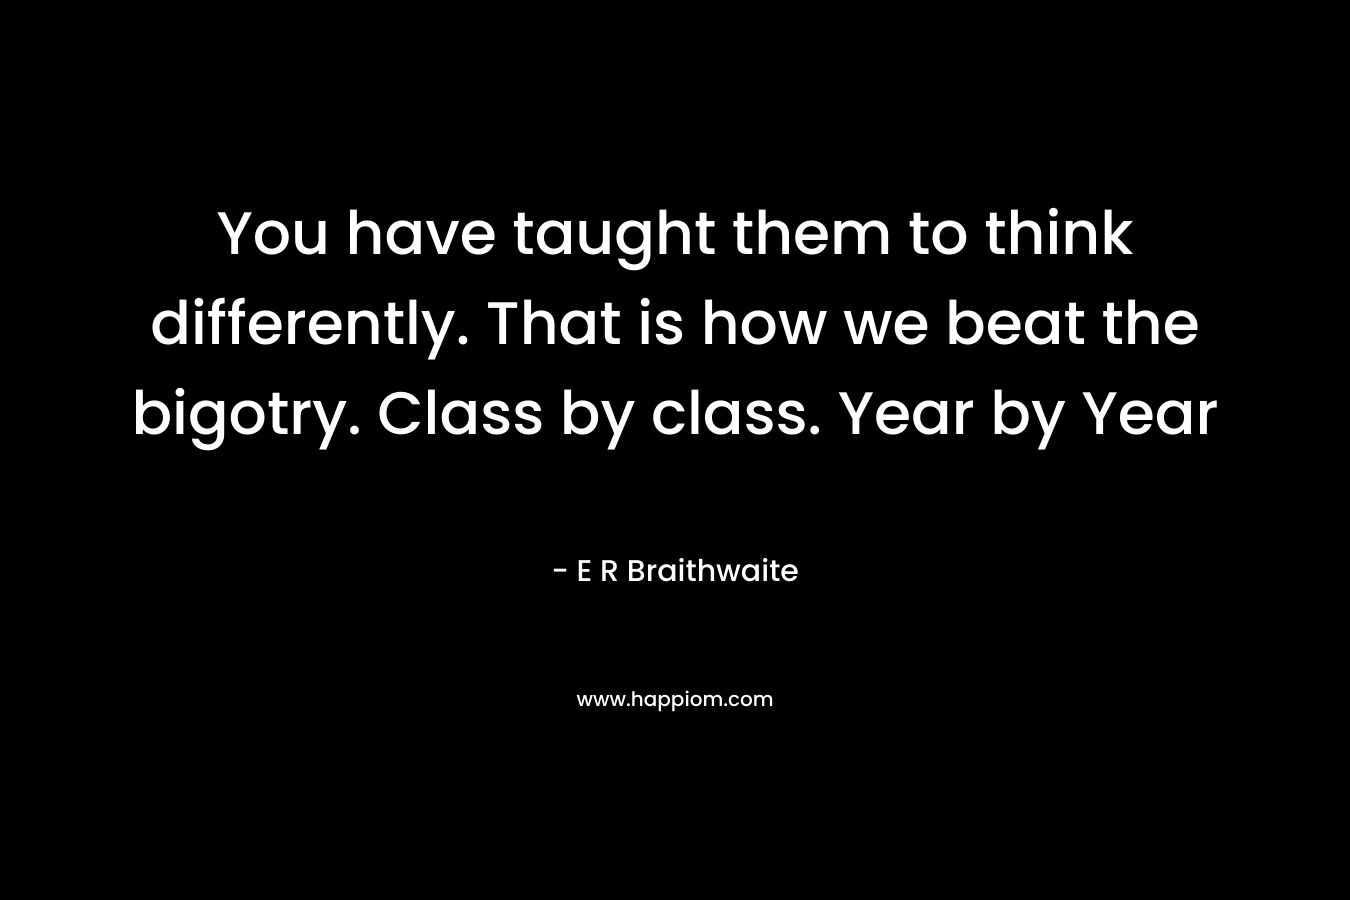 You have taught them to think differently. That is how we beat the bigotry. Class by class. Year by Year – E R Braithwaite